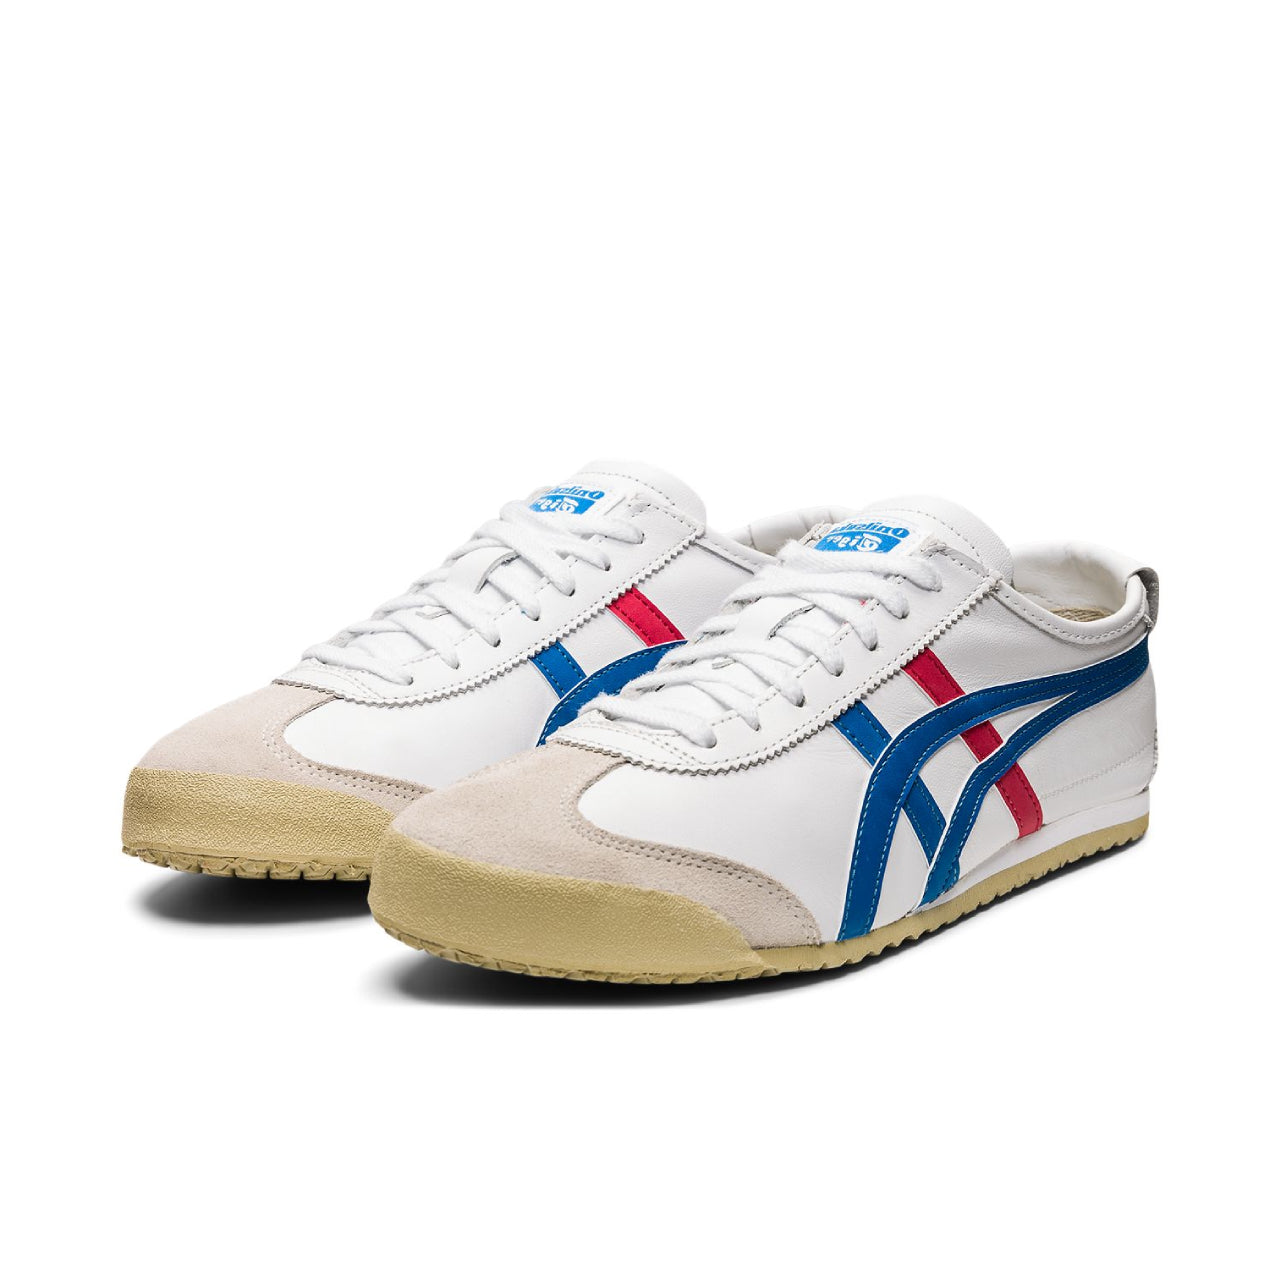 Onitsuka Tiger Mexico 66 White Blue Red - 1183C102-100/DL408-0146 - Medial